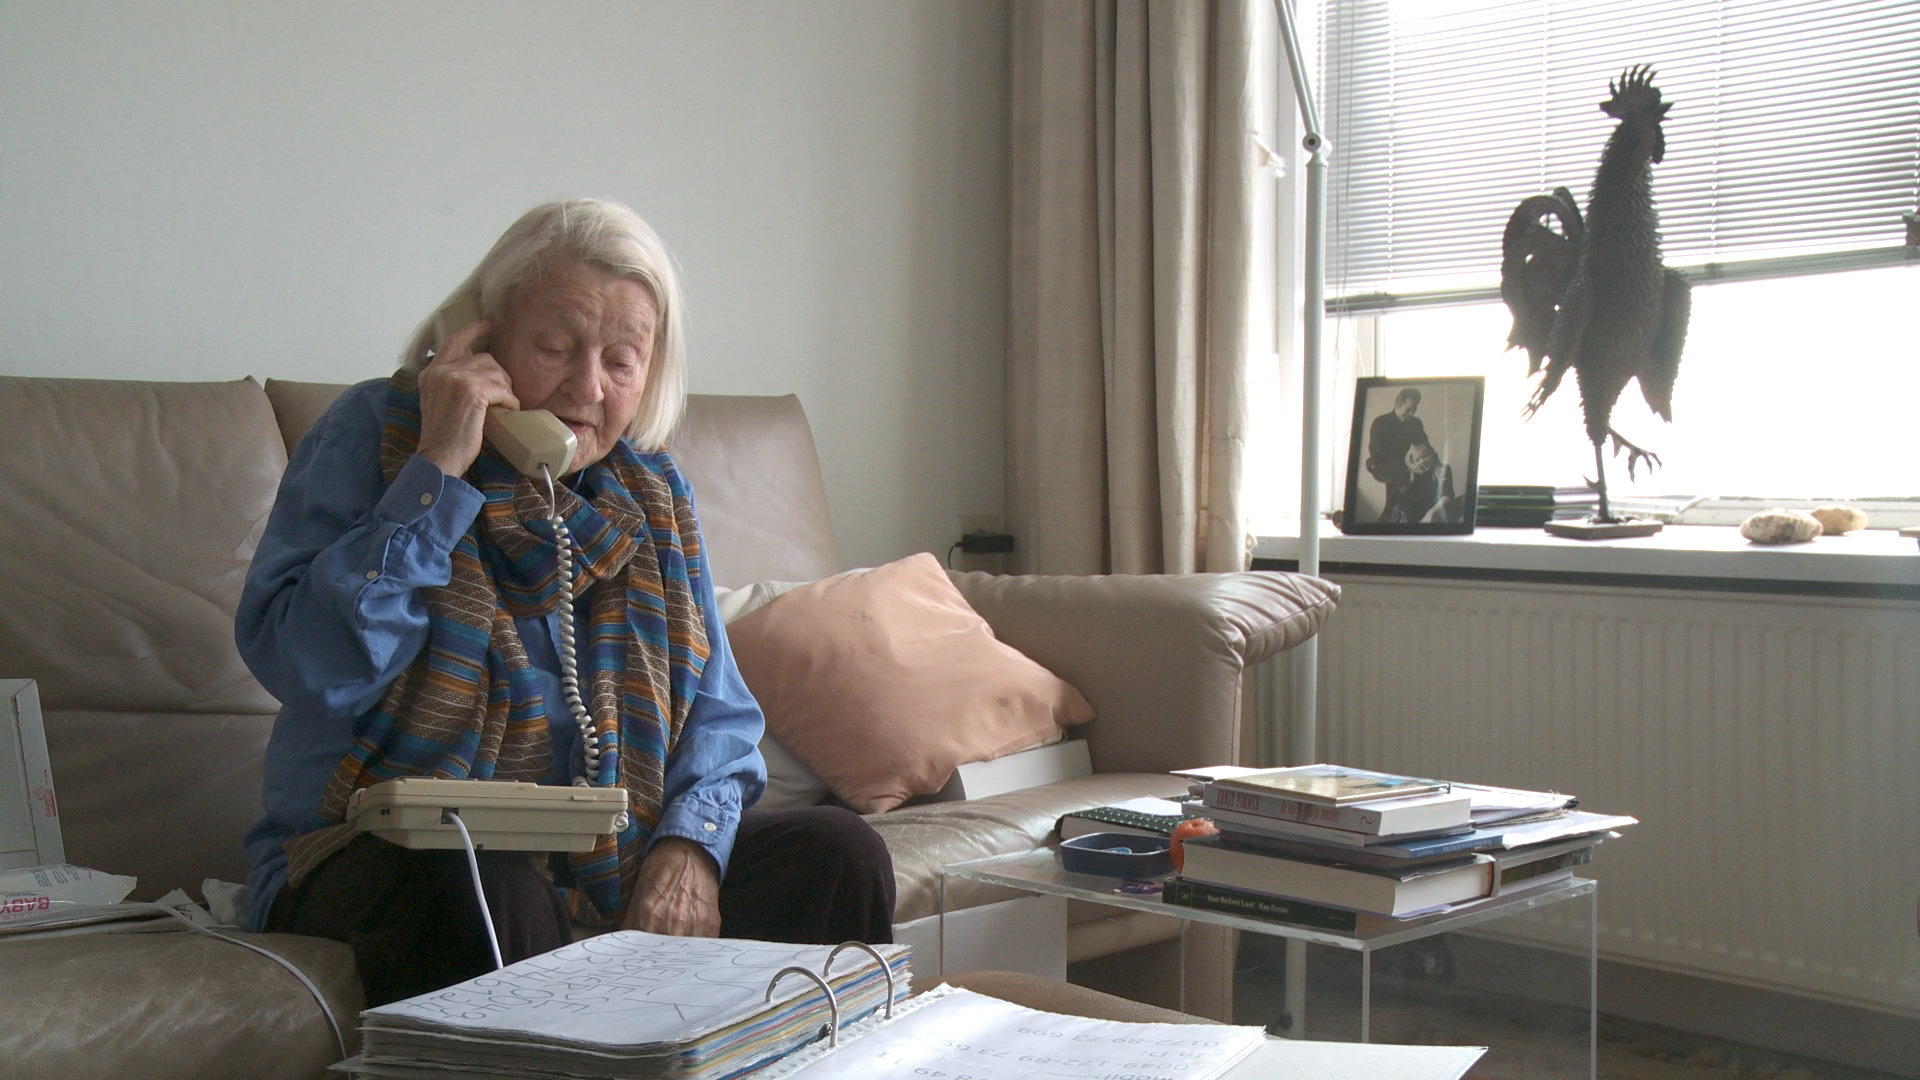 Still from the film Een klein beetje nog. Elisabeth is sitting on her couch on the phone.